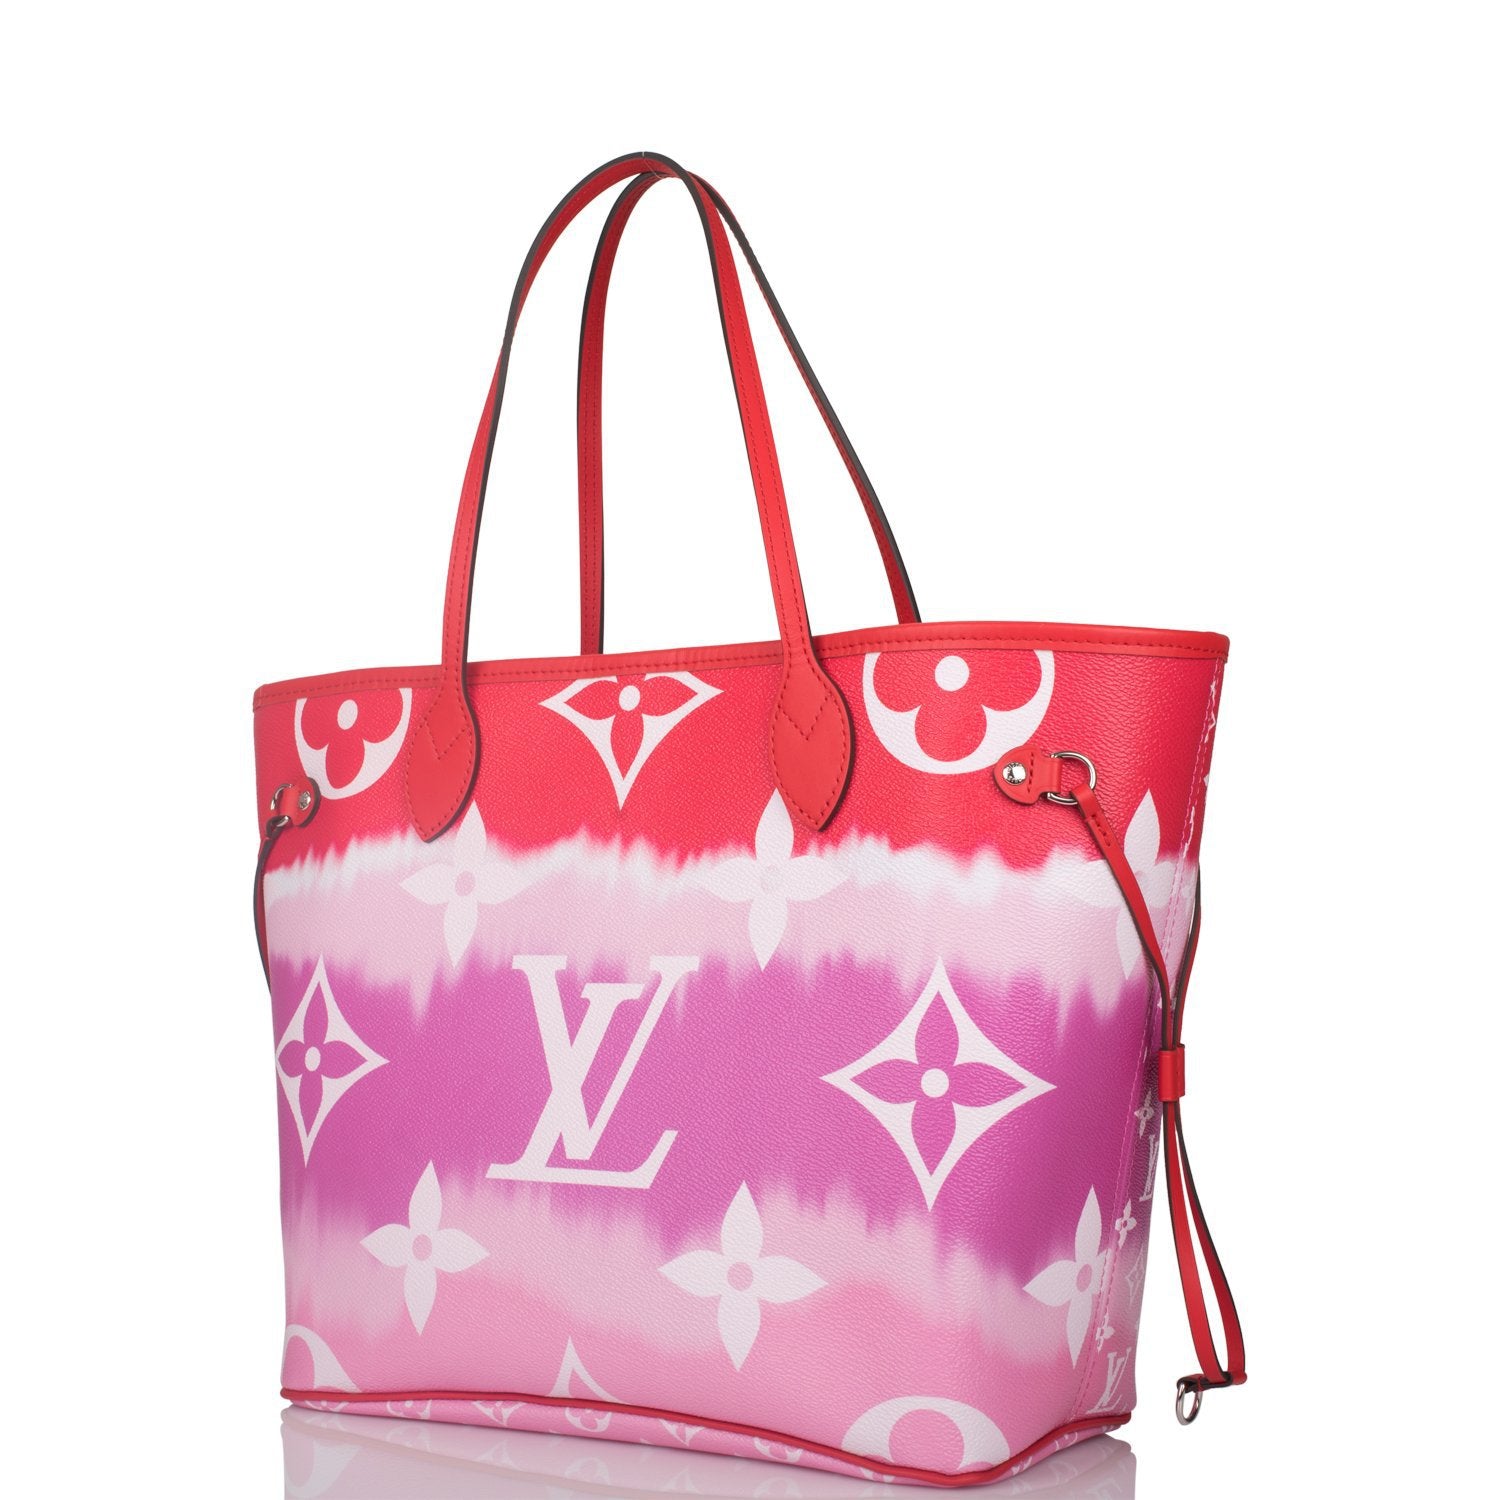 Louis Vuitton Handbags And Accessories - New Arrivals – Madison Avenue Couture